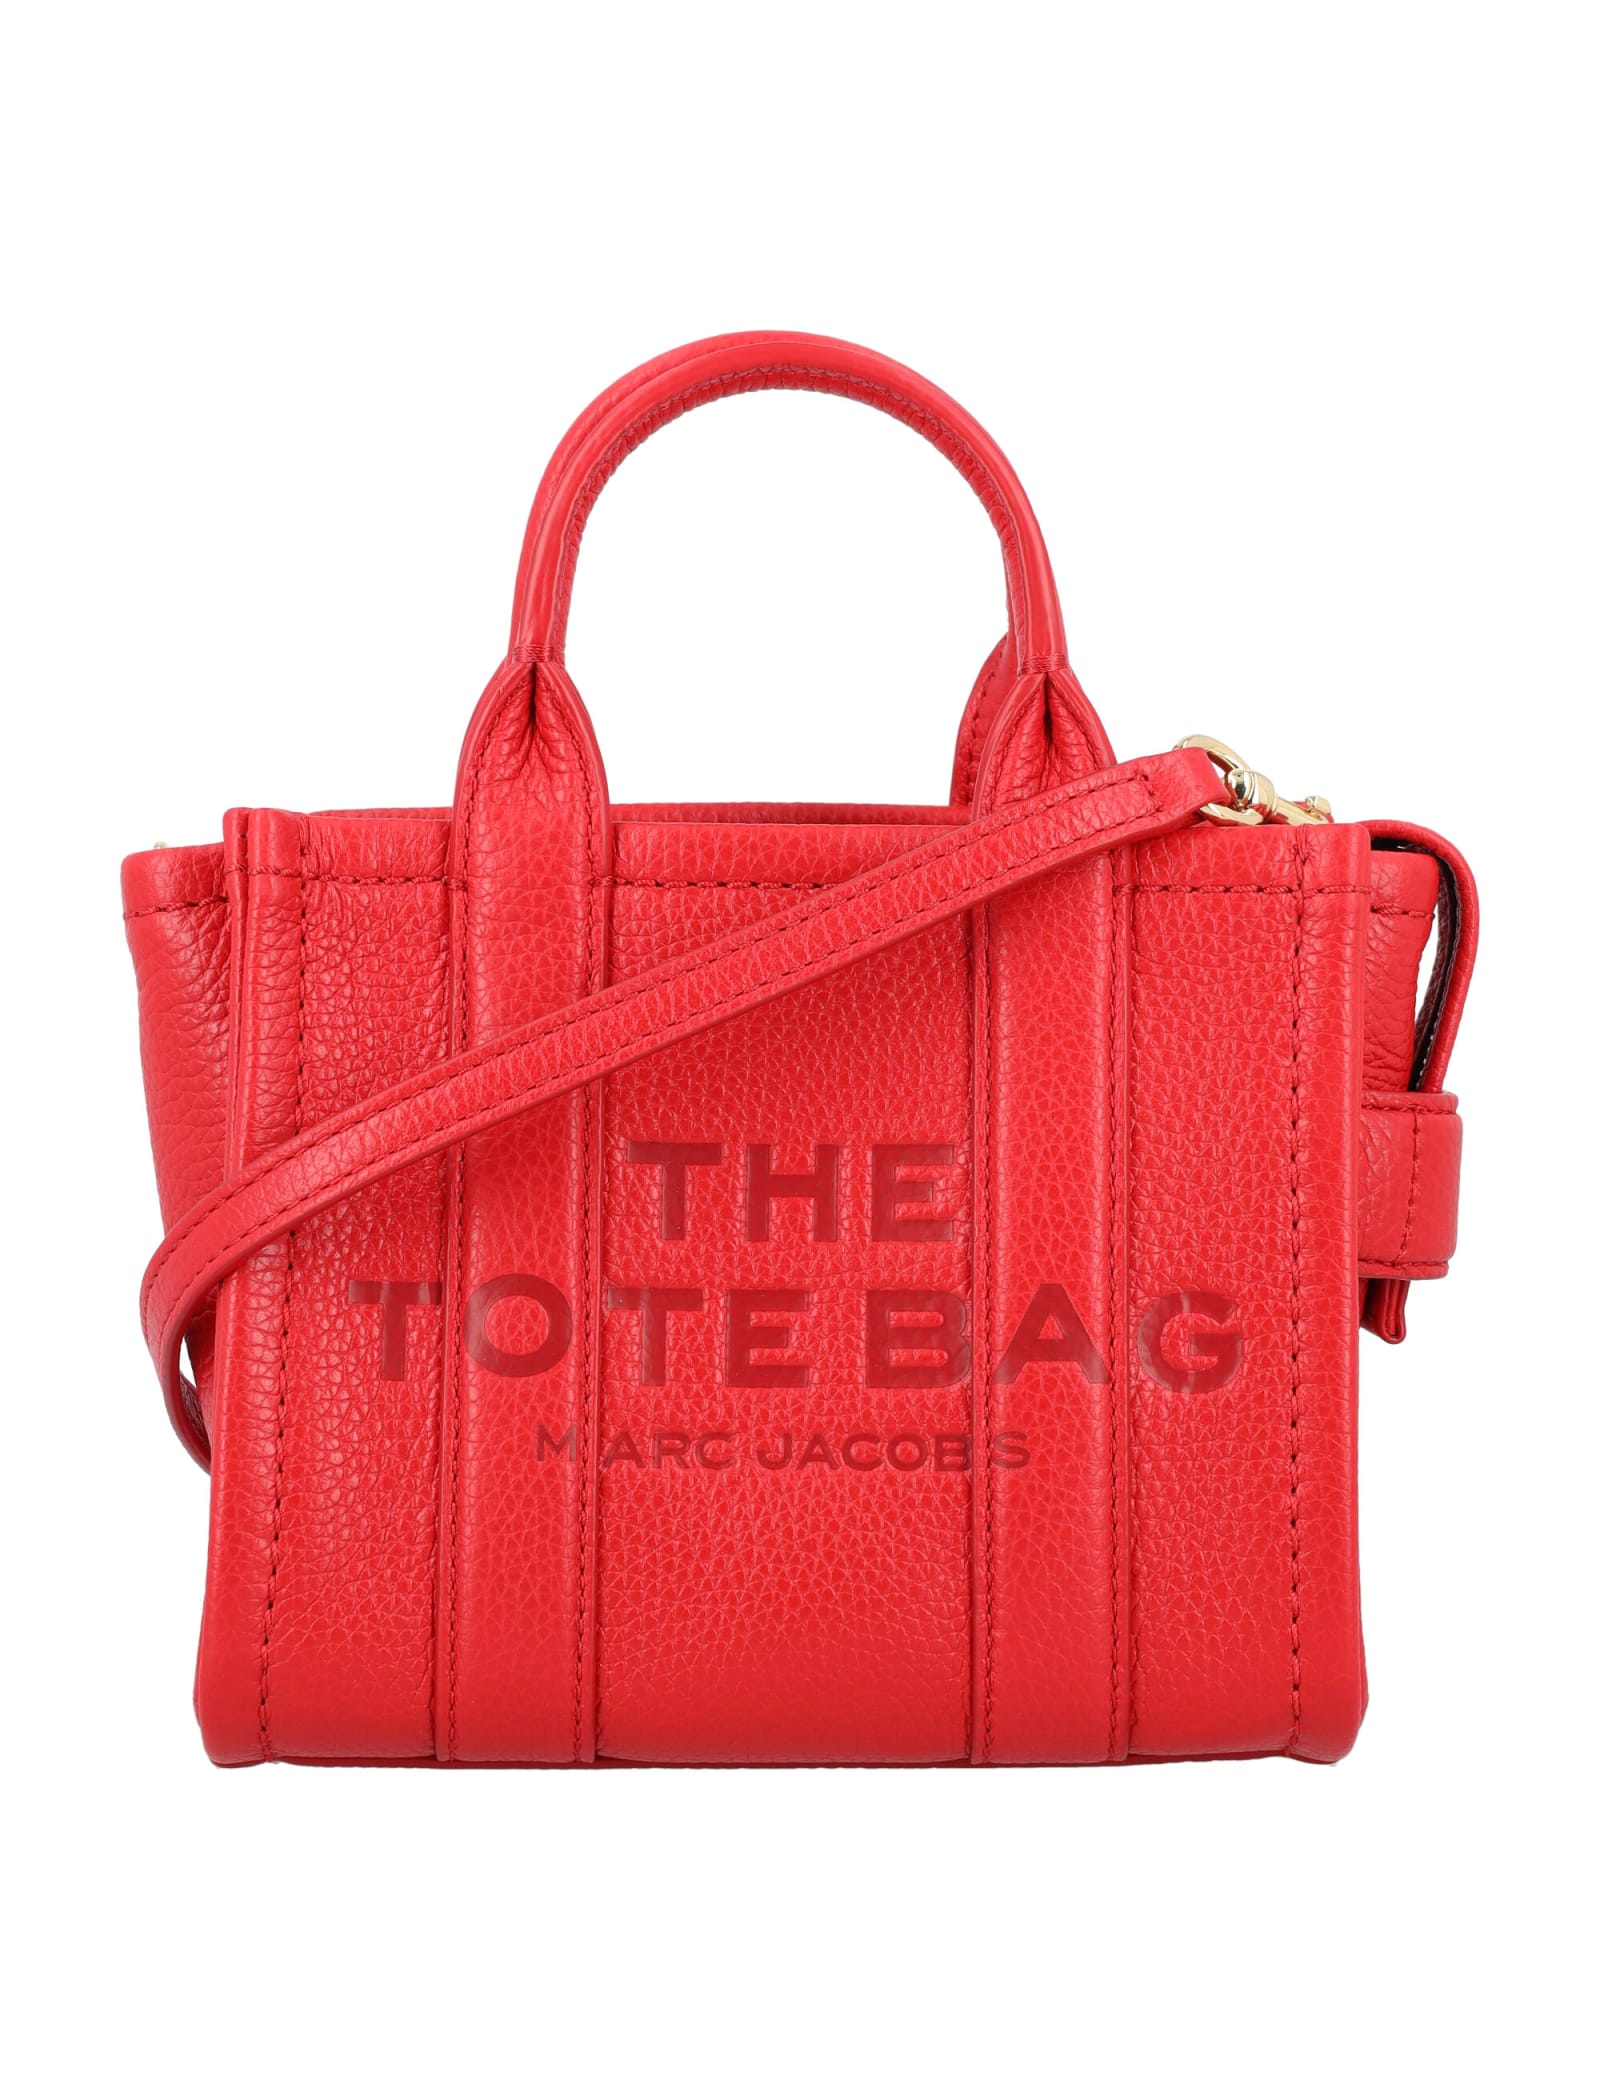 Marc Jacobs The Mini Tote Leather Bag In Red